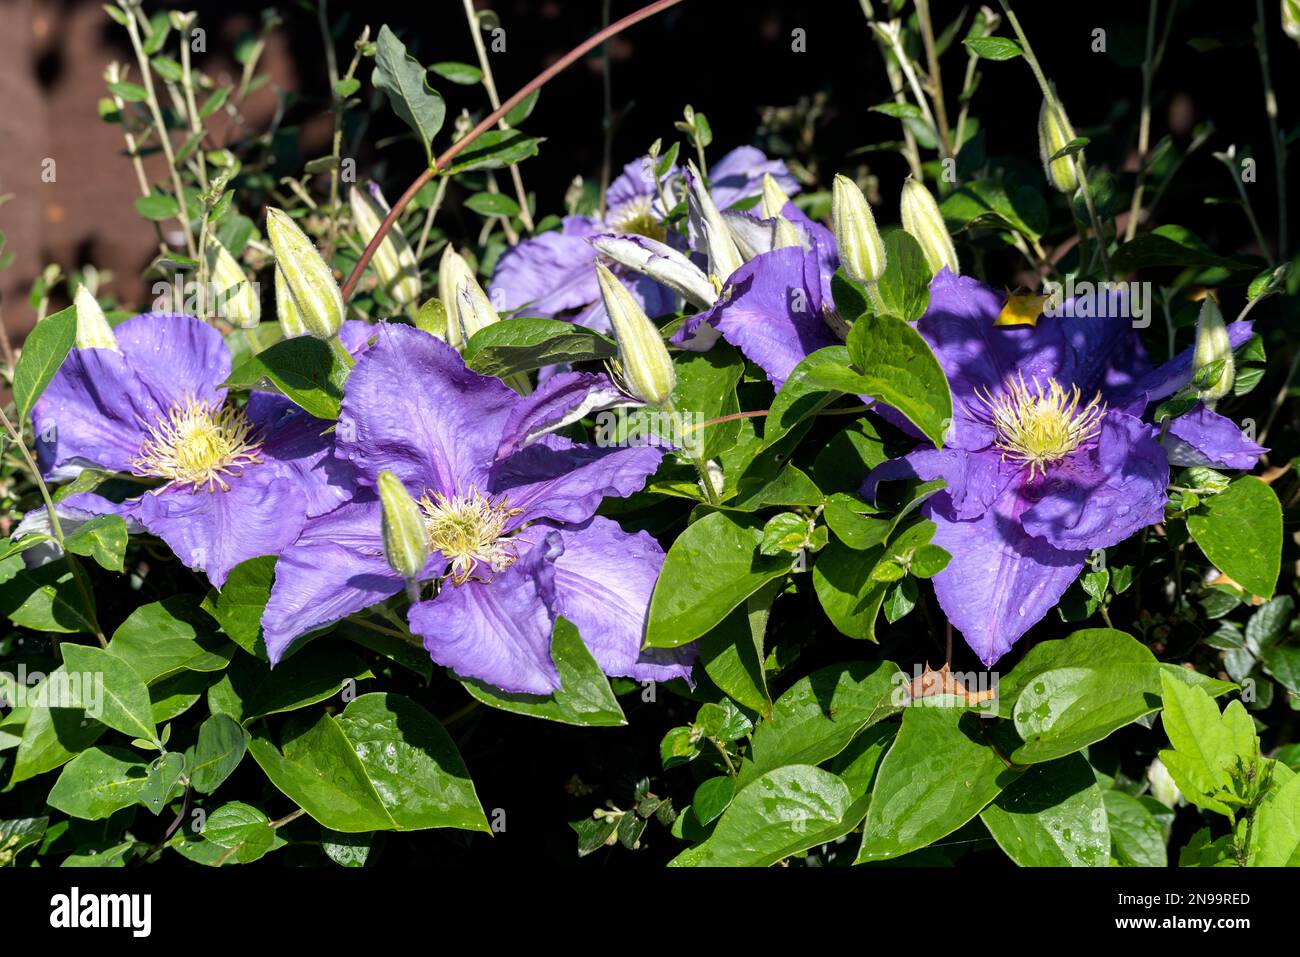 Clematis (General Sikorski) sunlit after the rain Stock Photo